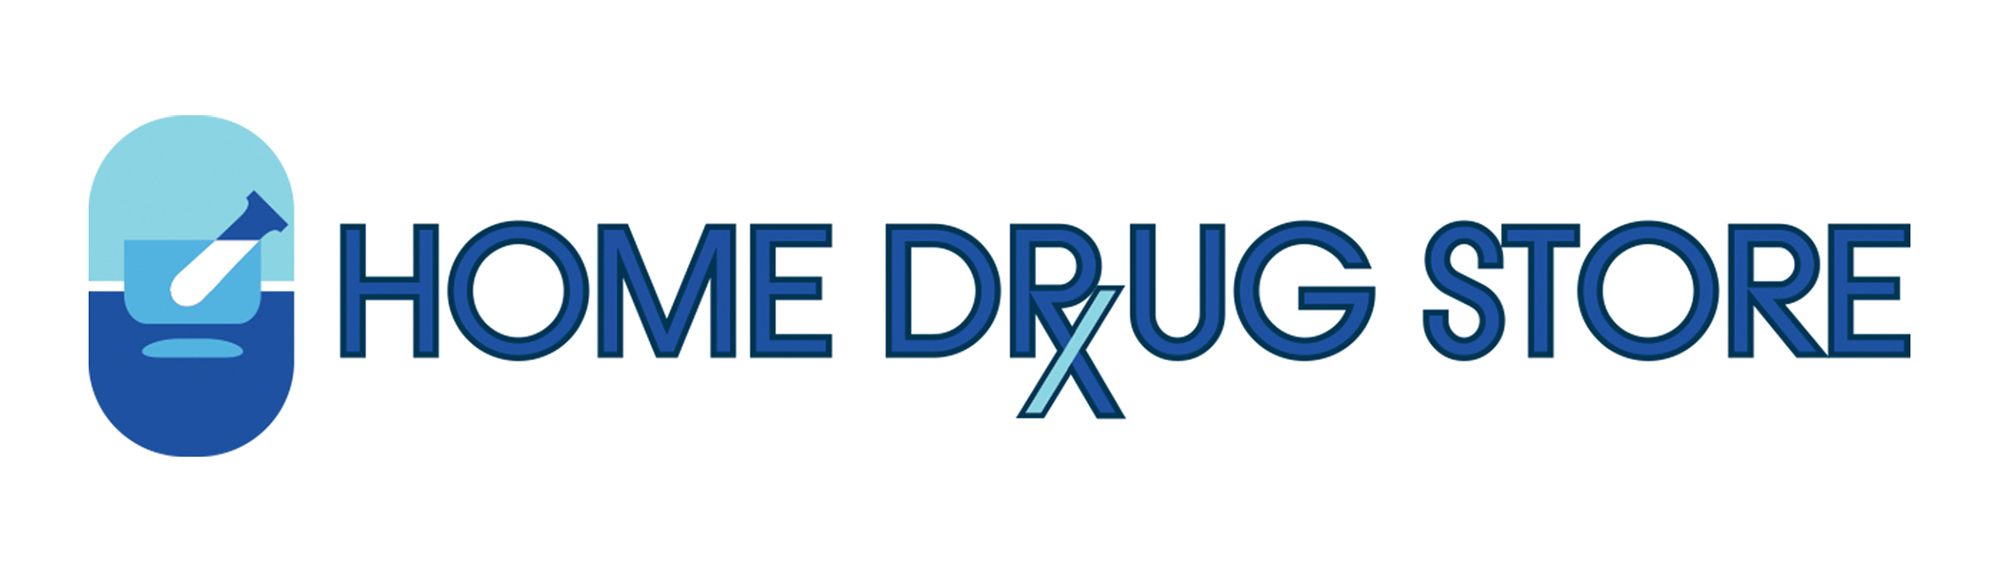 Home Drug Store pill logo and name